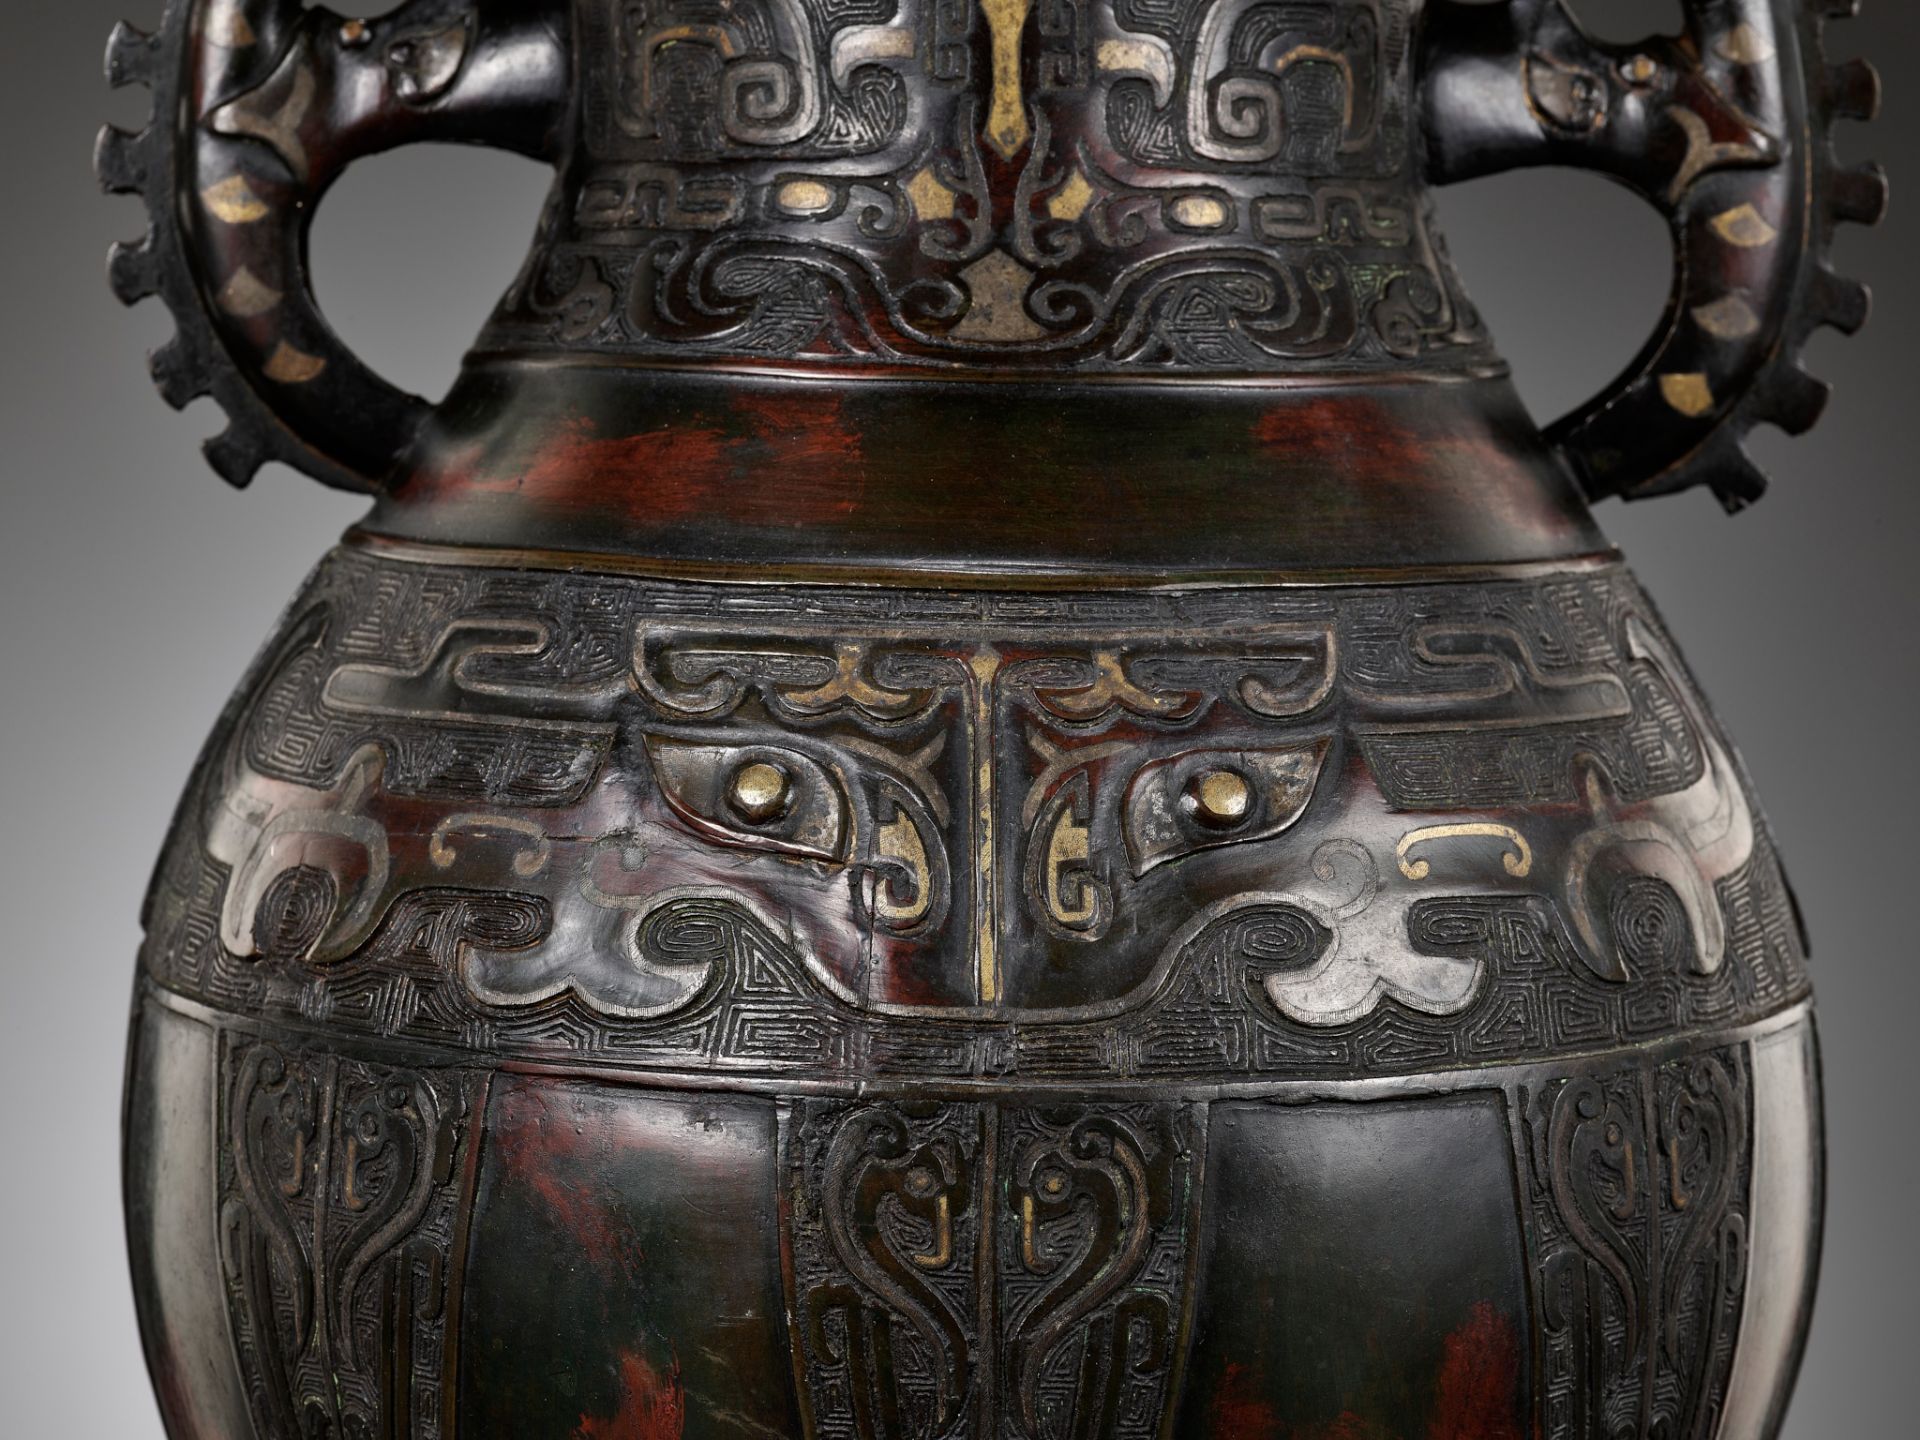 A LARGE ARCHAISTIC GOLD AND SILVER-INLAID BRONZE VASE, HU, QING DYNASTY - Image 13 of 14